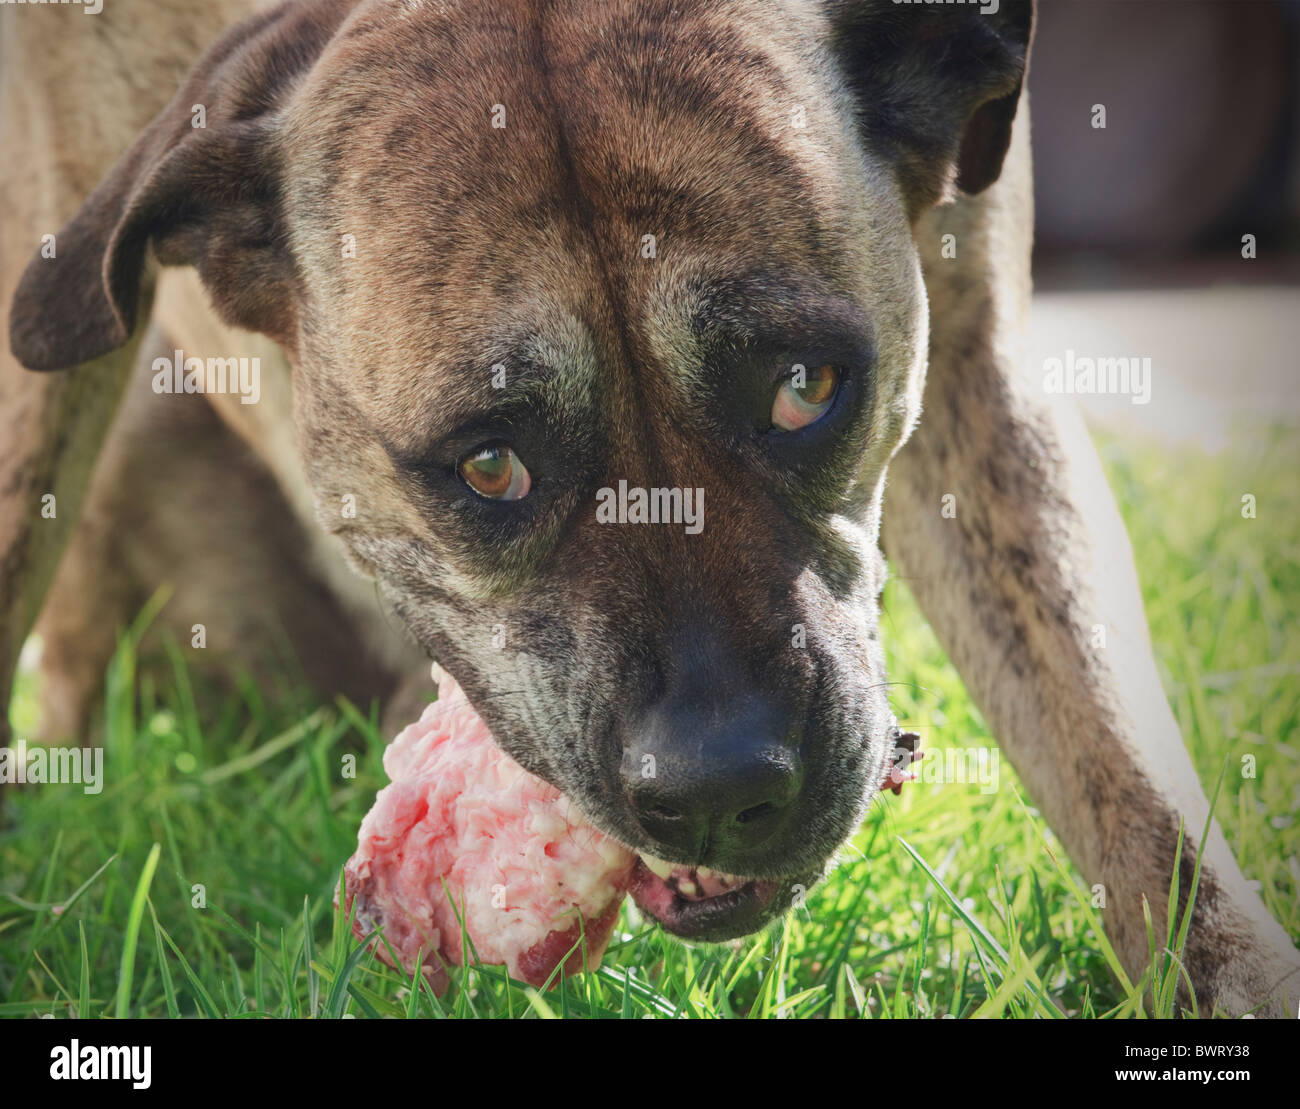 Savage looking dog eating hunk of meat Stock Photo